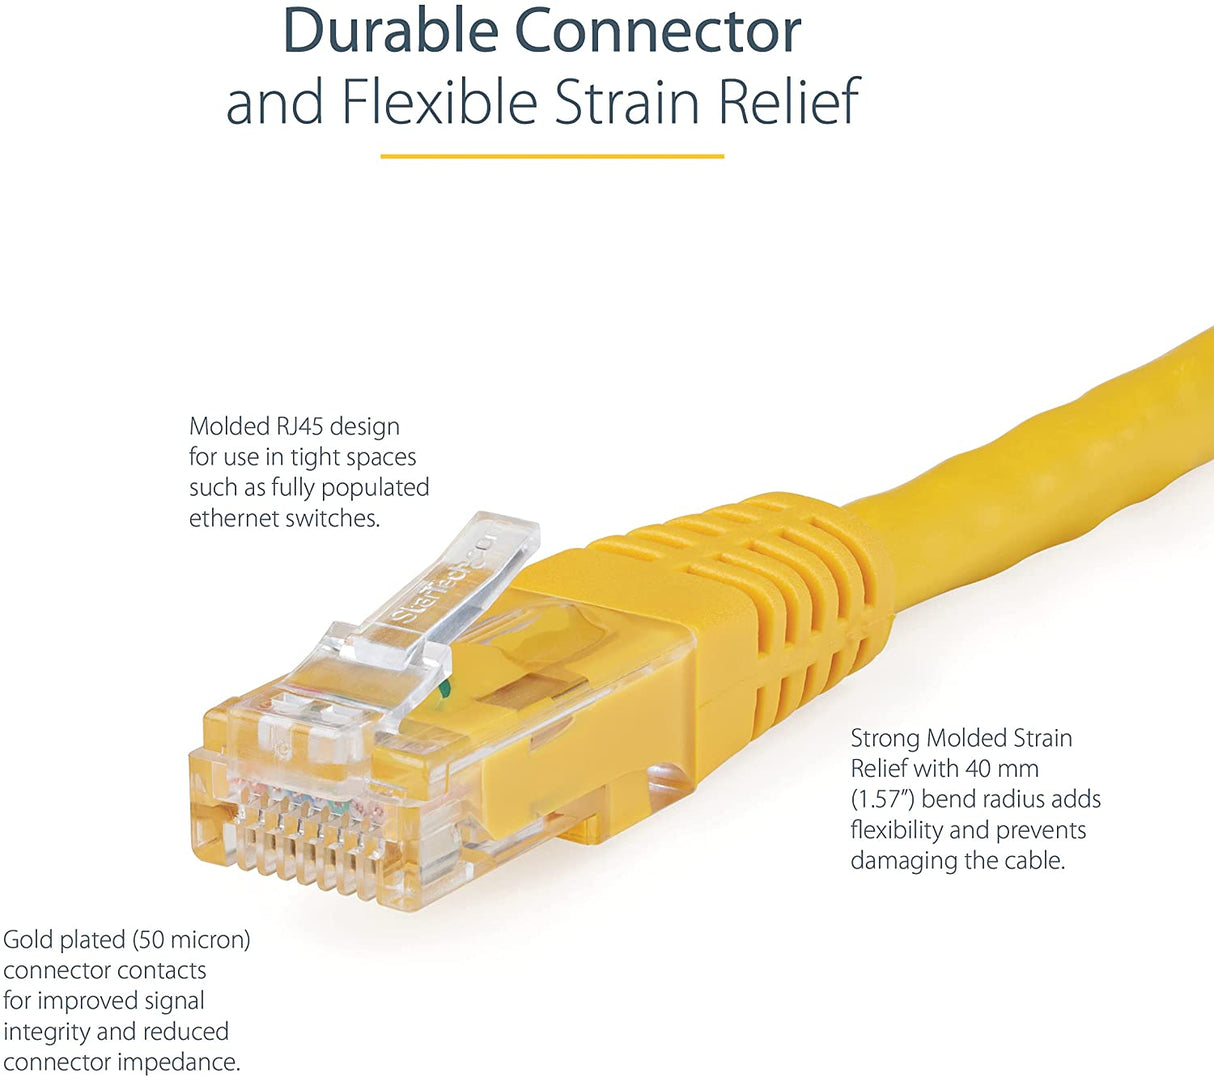 StarTech.com 10ft CAT6 Ethernet Cable - Yellow CAT 6 Gigabit Ethernet Wire -650MHz 100W PoE++ RJ45 UTP Molded Category 6 Network/Patch Cord w/Strain Relief/Fluke Tested UL/TIA Certified (C6PATCH10YL) Yellow 10 ft / 3m 1 Pack